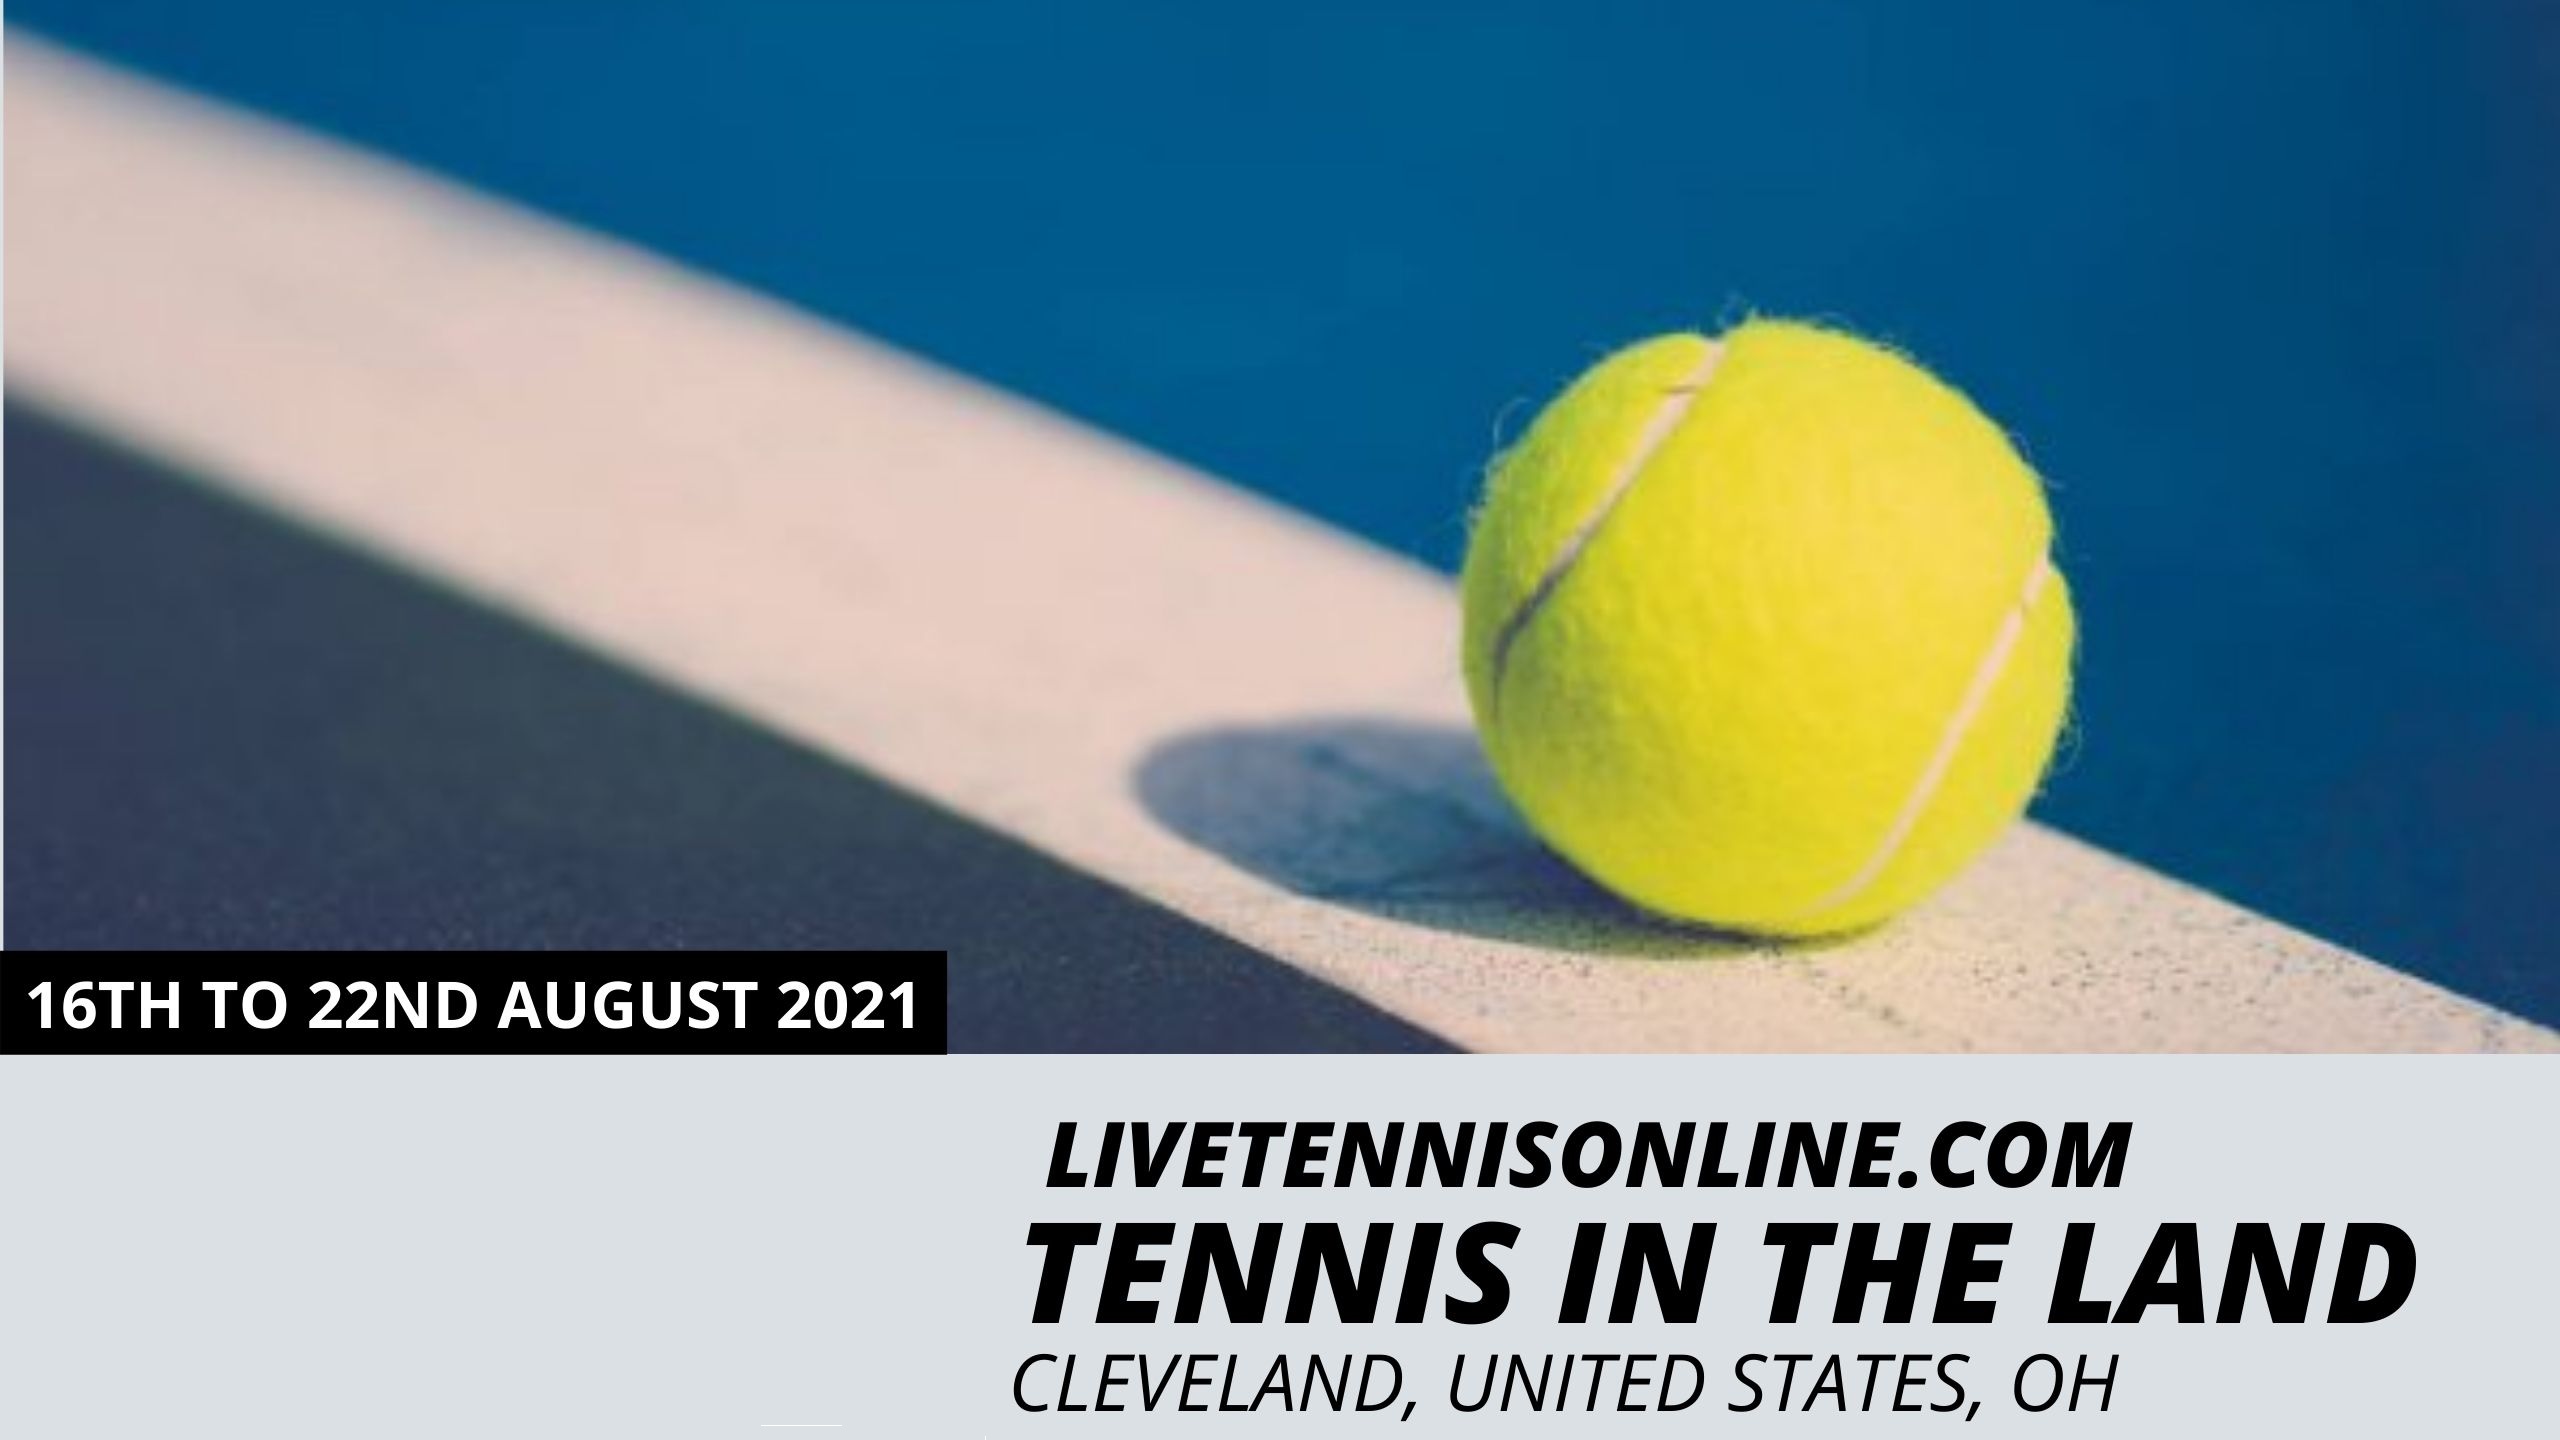 tennis-in-the-land-wta-live-stream